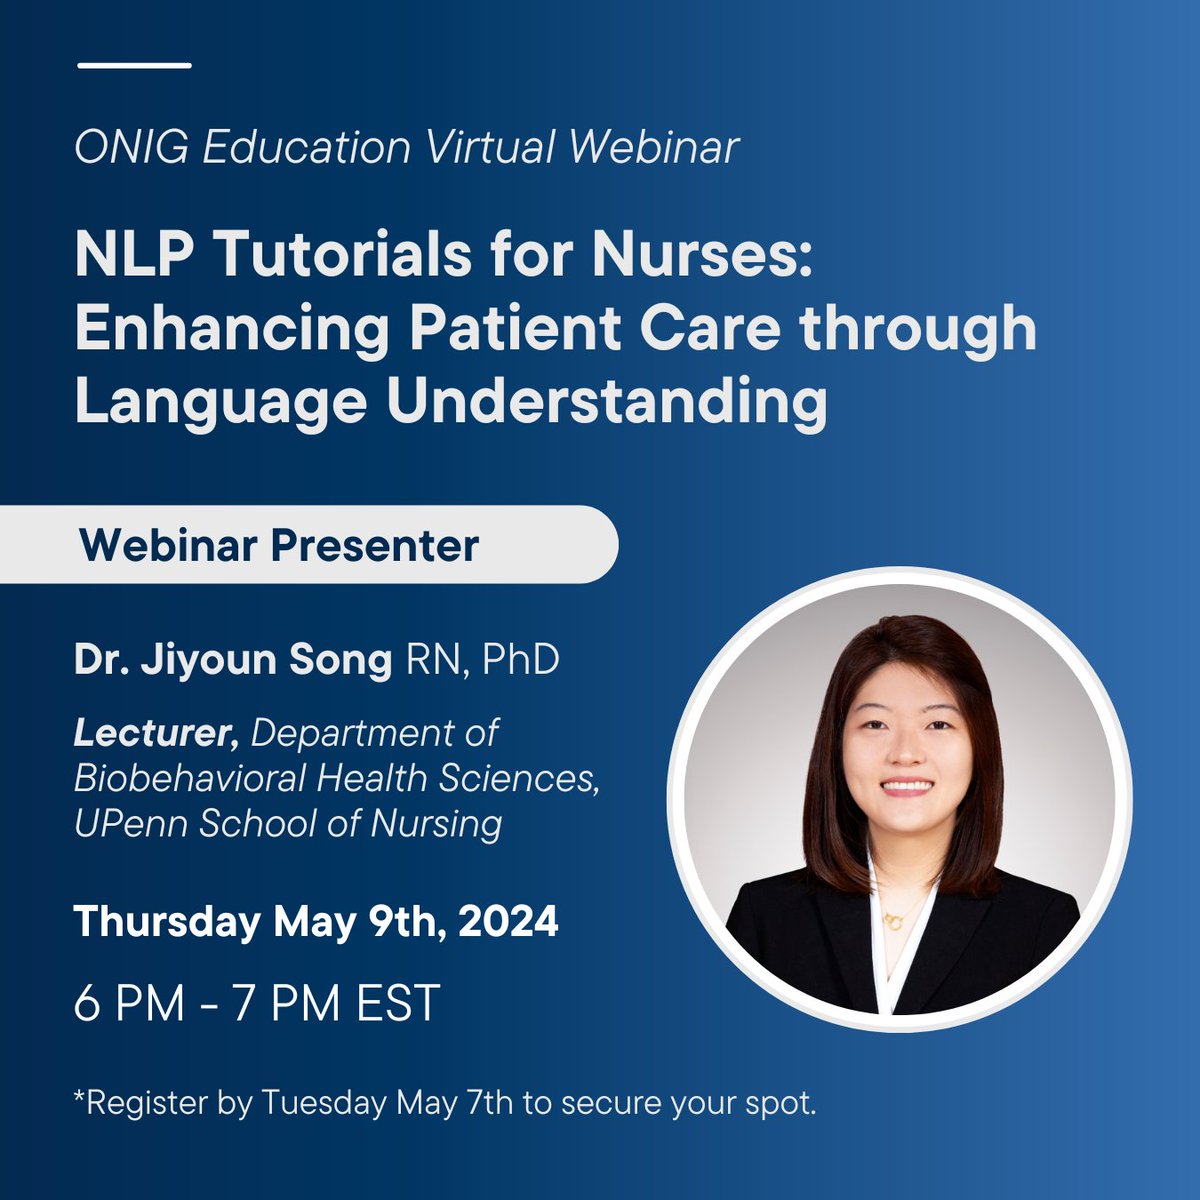 Happening this Thursday!

Register for this upcoming (& free) virtual event! We will be welcoming Dr. Jiyoun Song, who will be speaking about novel ways to use health data to enhance patient care!

forms.gle/gNz5y6rQASxpG6…

#NursingInformatics #MachineLearning #NLP #DigitalHealth